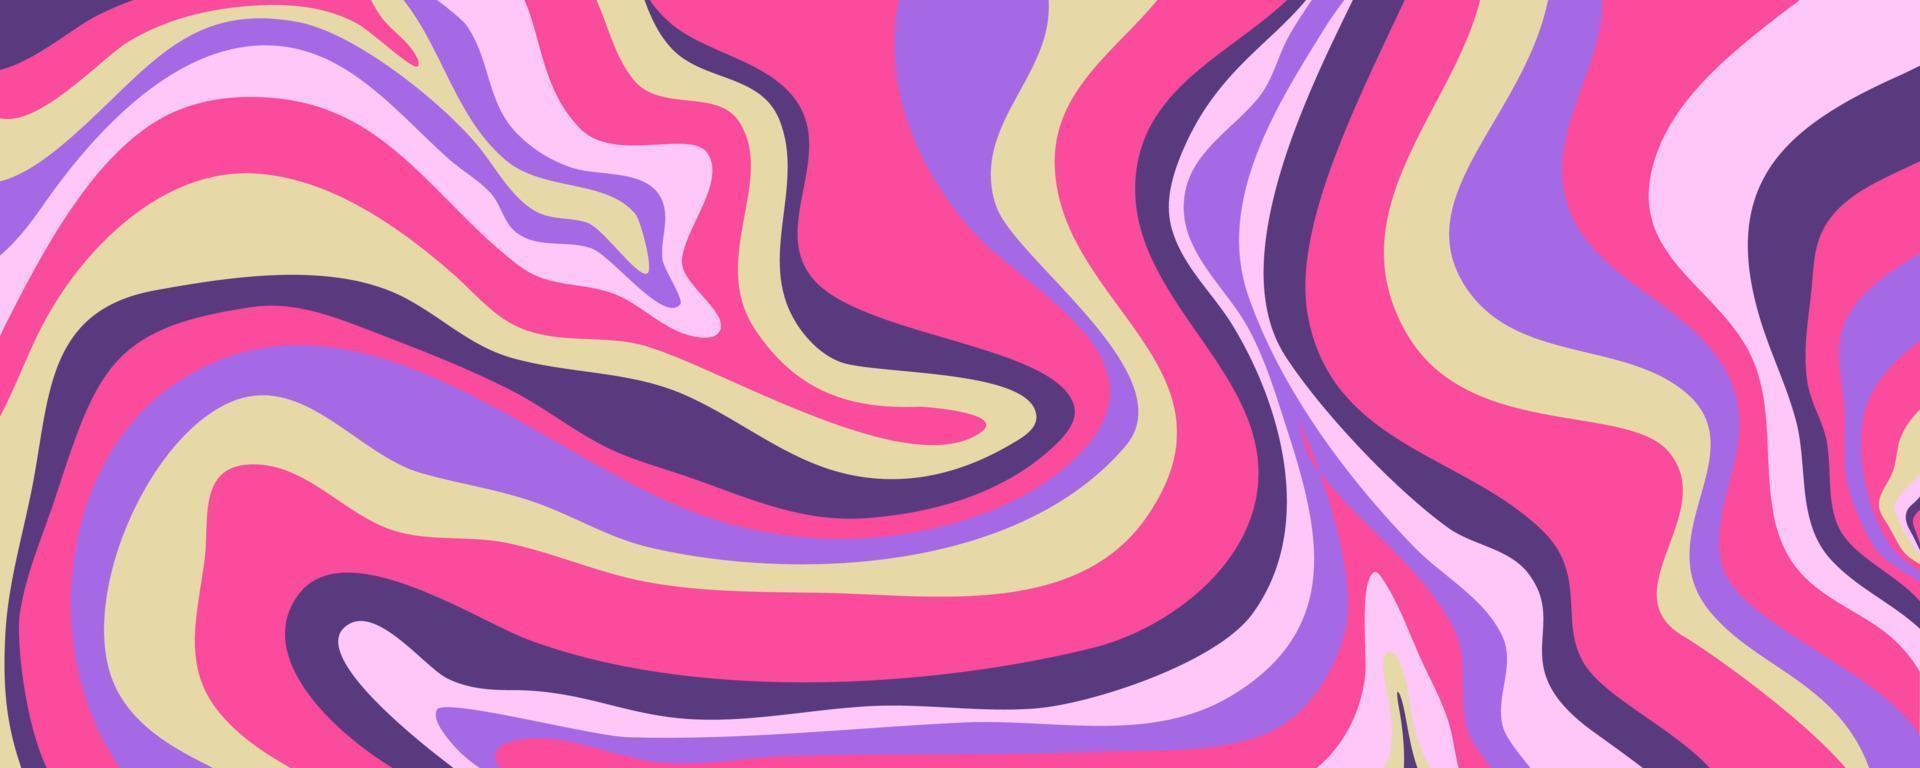 Grioovy psychedelic wave background for banner design. Retro 60s